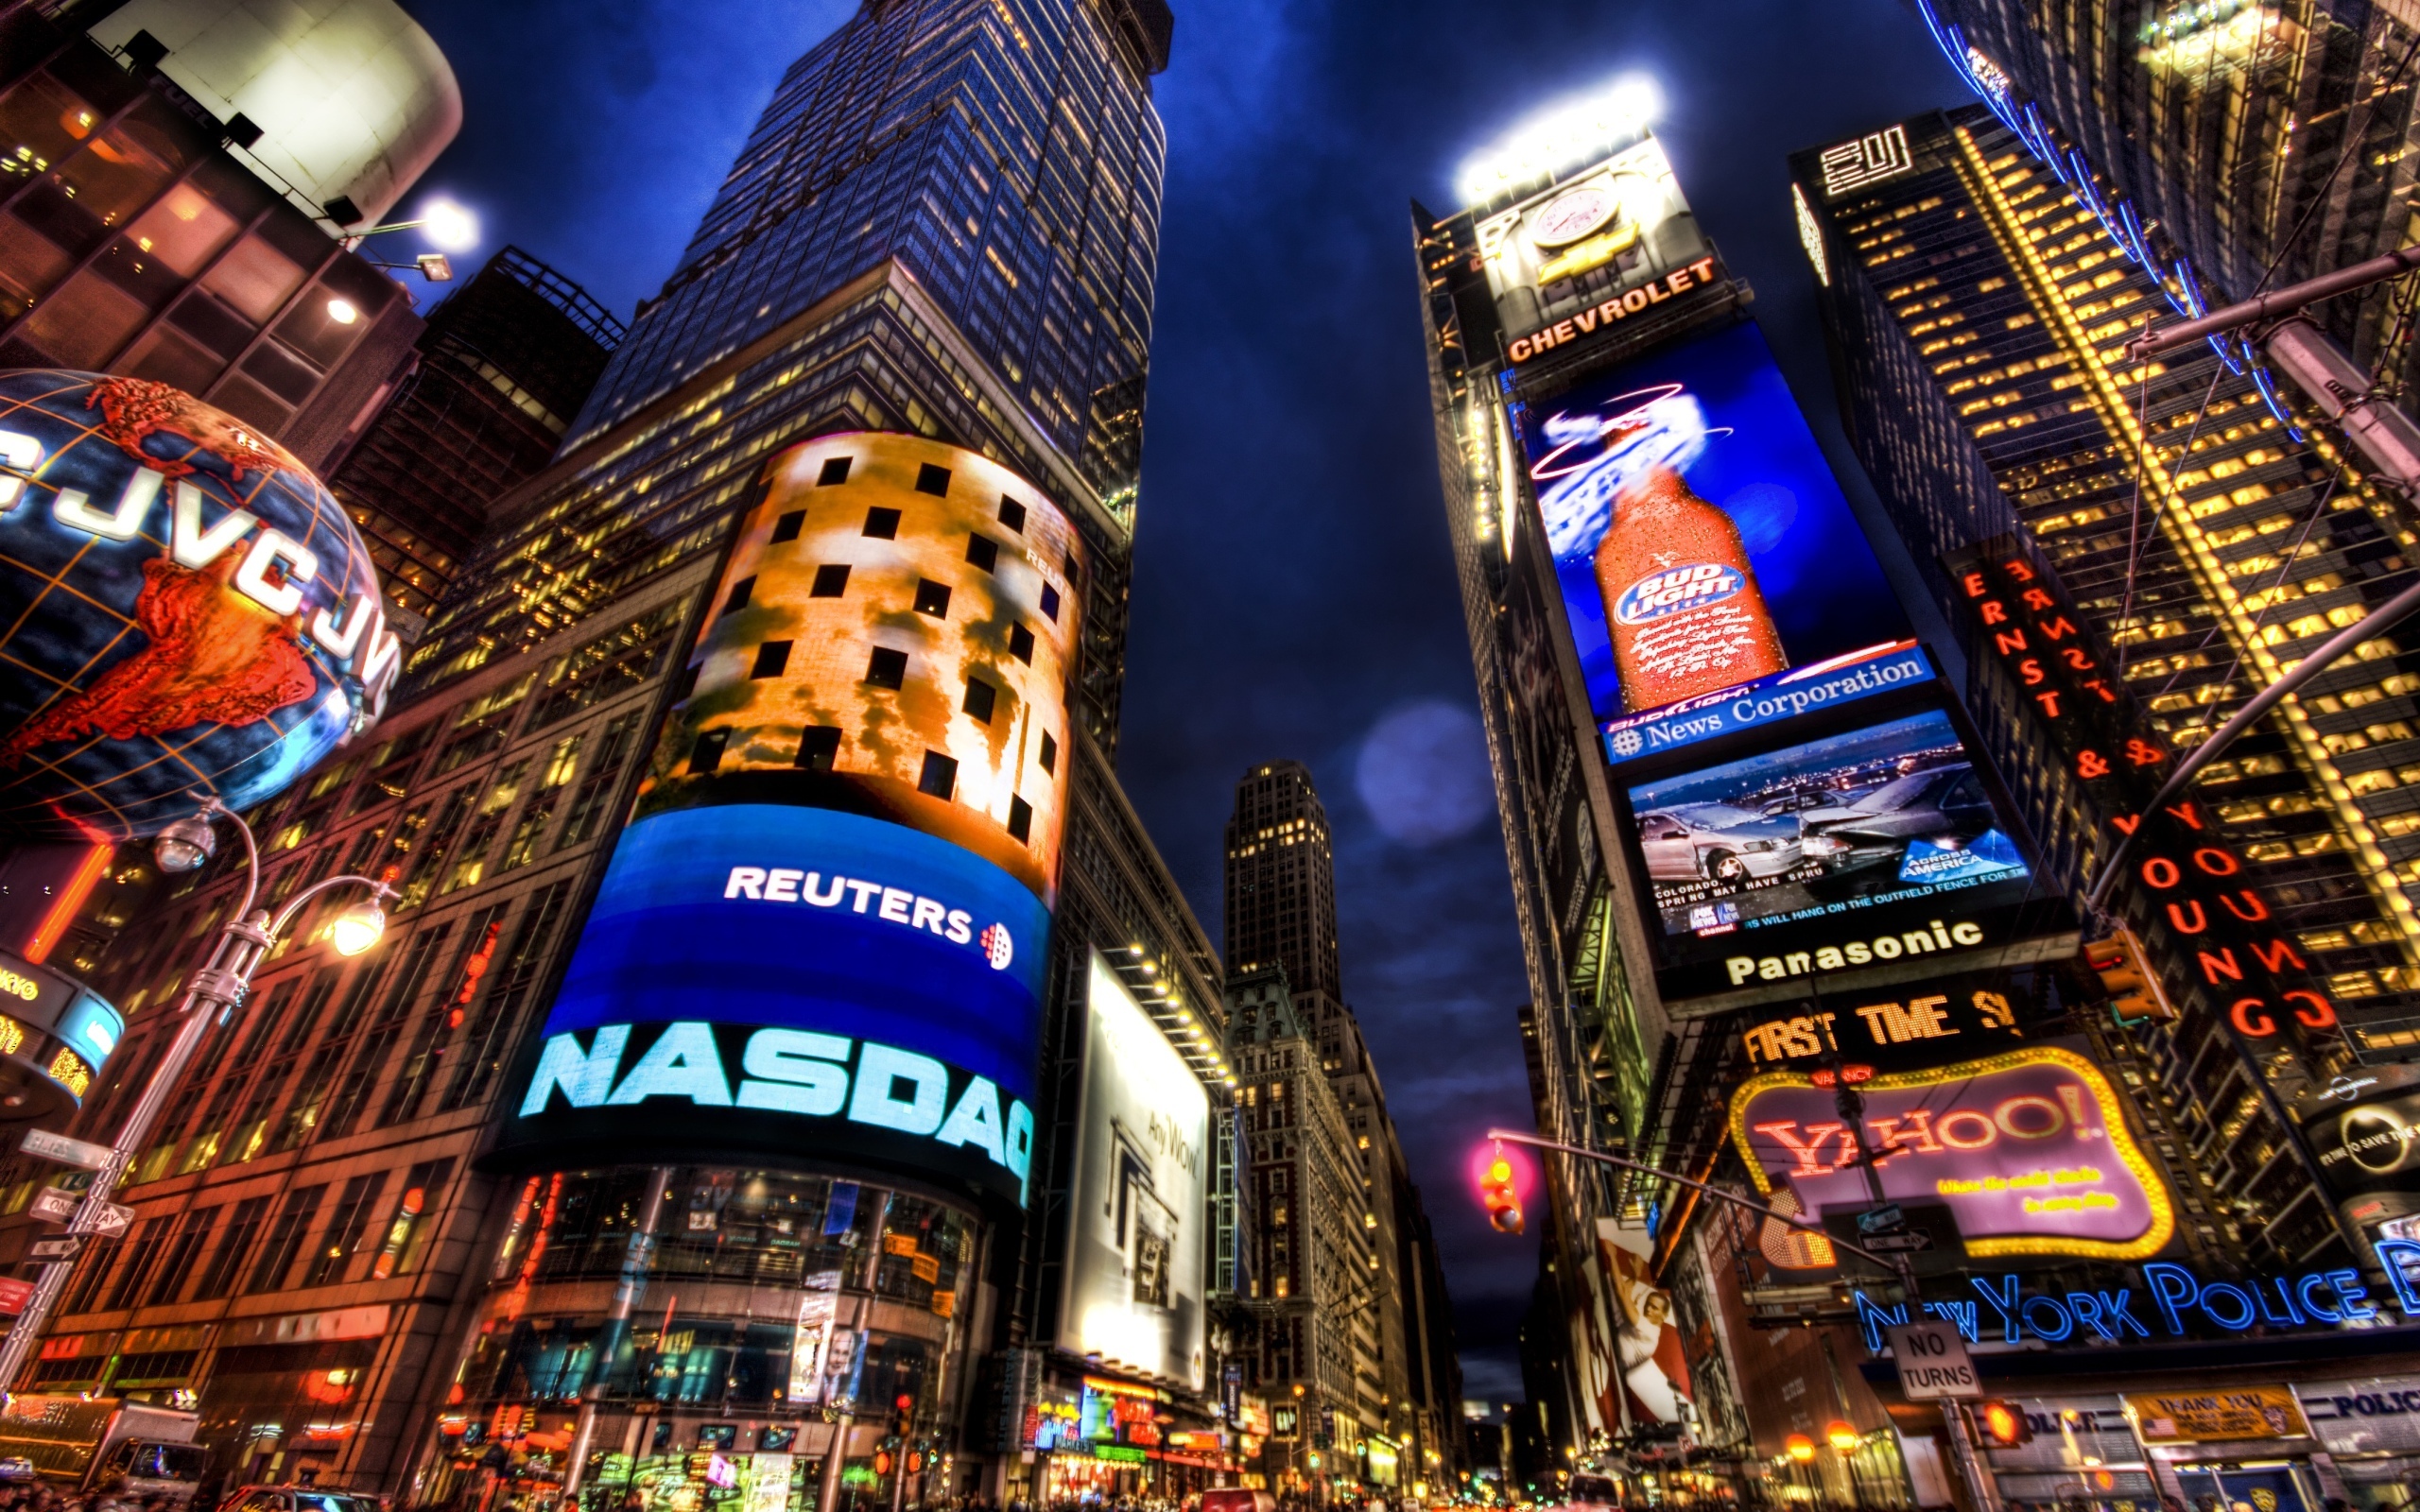 New York Time Square Wallpaper HD about life